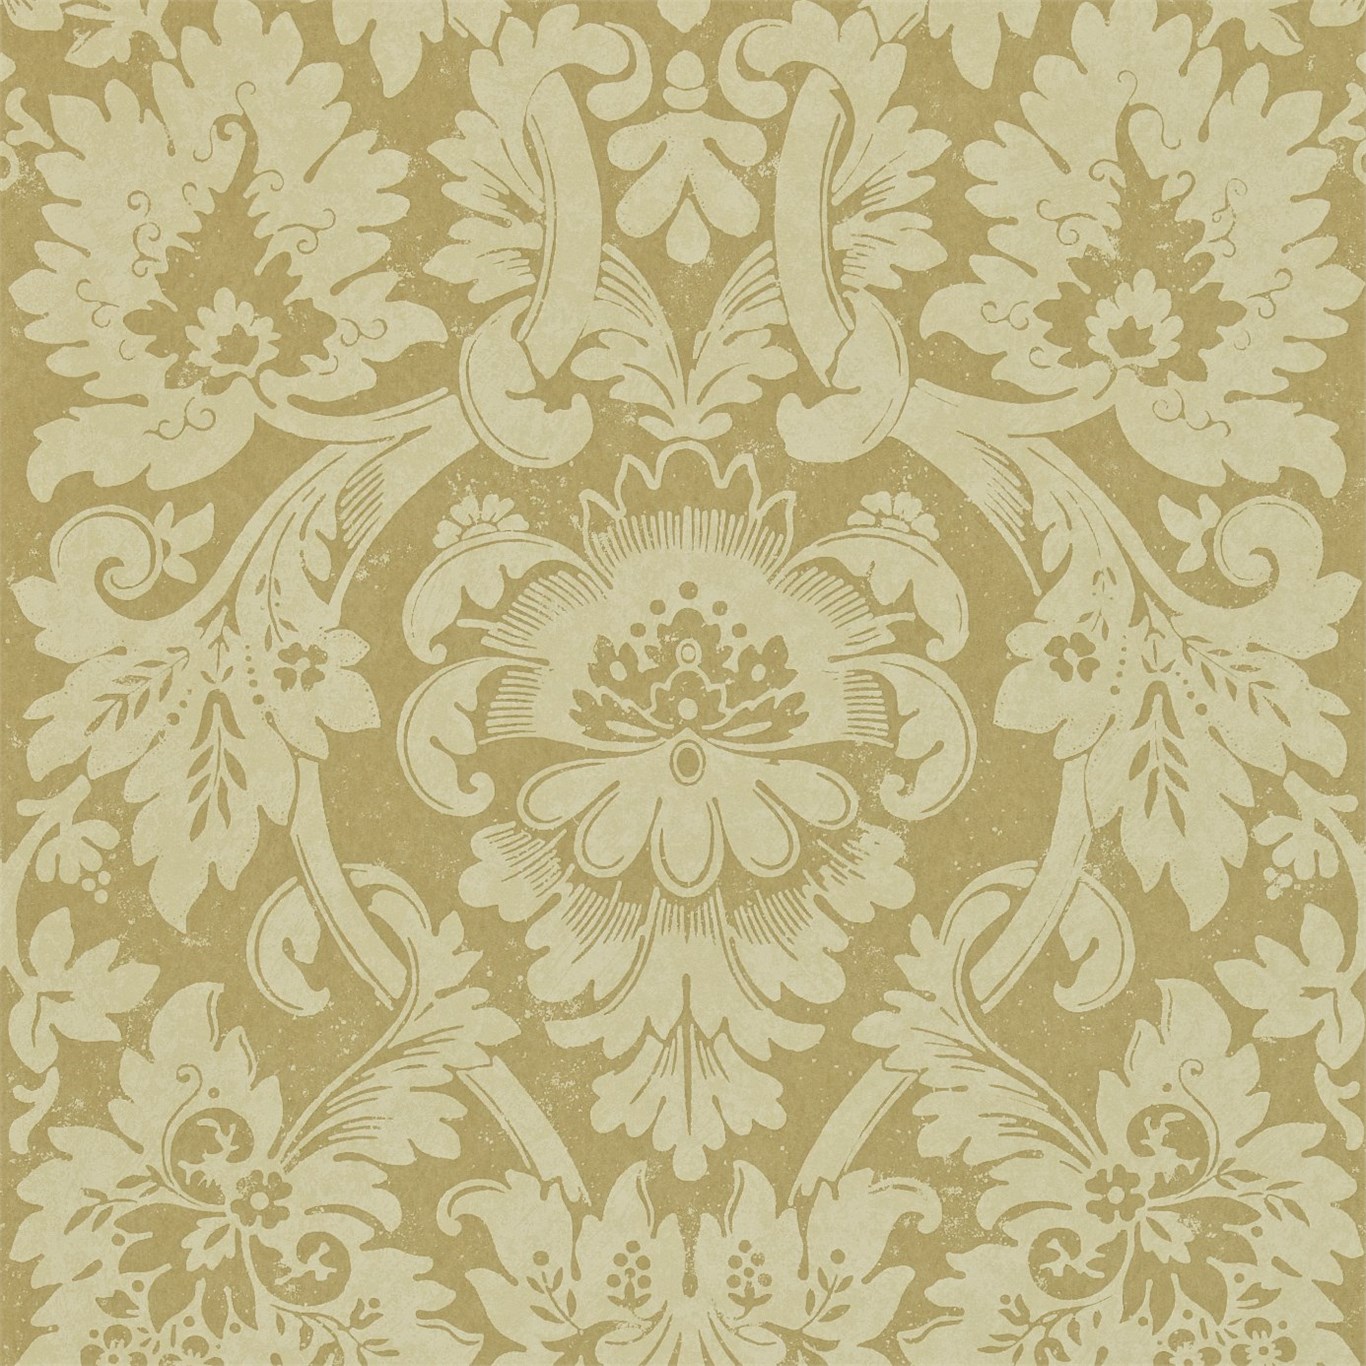 Free download Luxury Fabric and Wallpaper Design Products BritishUK Fabric  [1366x1366] for your Desktop, Mobile & Tablet | Explore 43+ Linen Wallpaper  Designs | Textured Linen Wallpaper, Linen Look Wallpaper, Natural Linen  Wallpaper